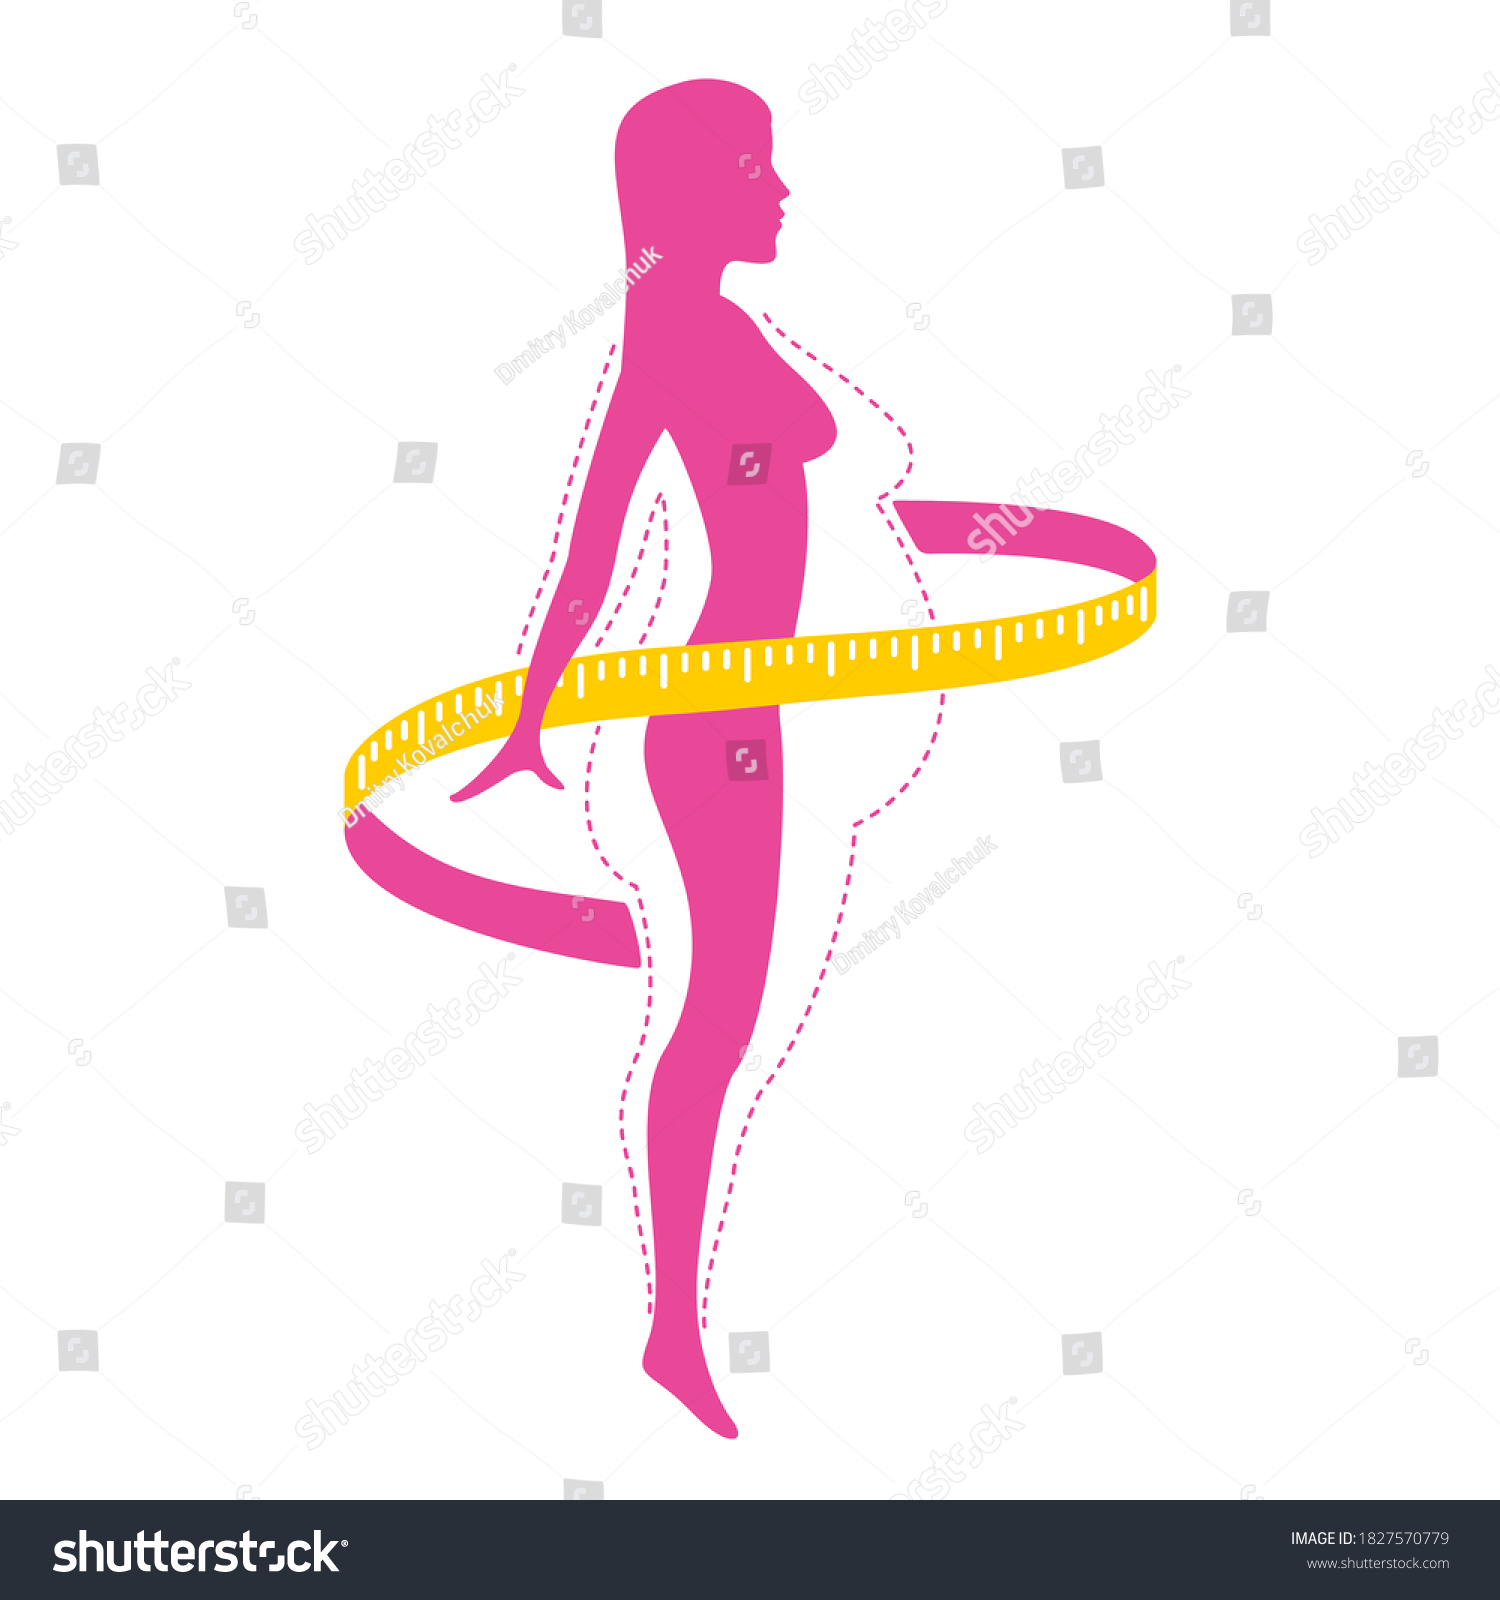 SVG of Weight loss program logo (isolated icon) - female silhouette with fat and slim body comparsion and measuring tape around svg